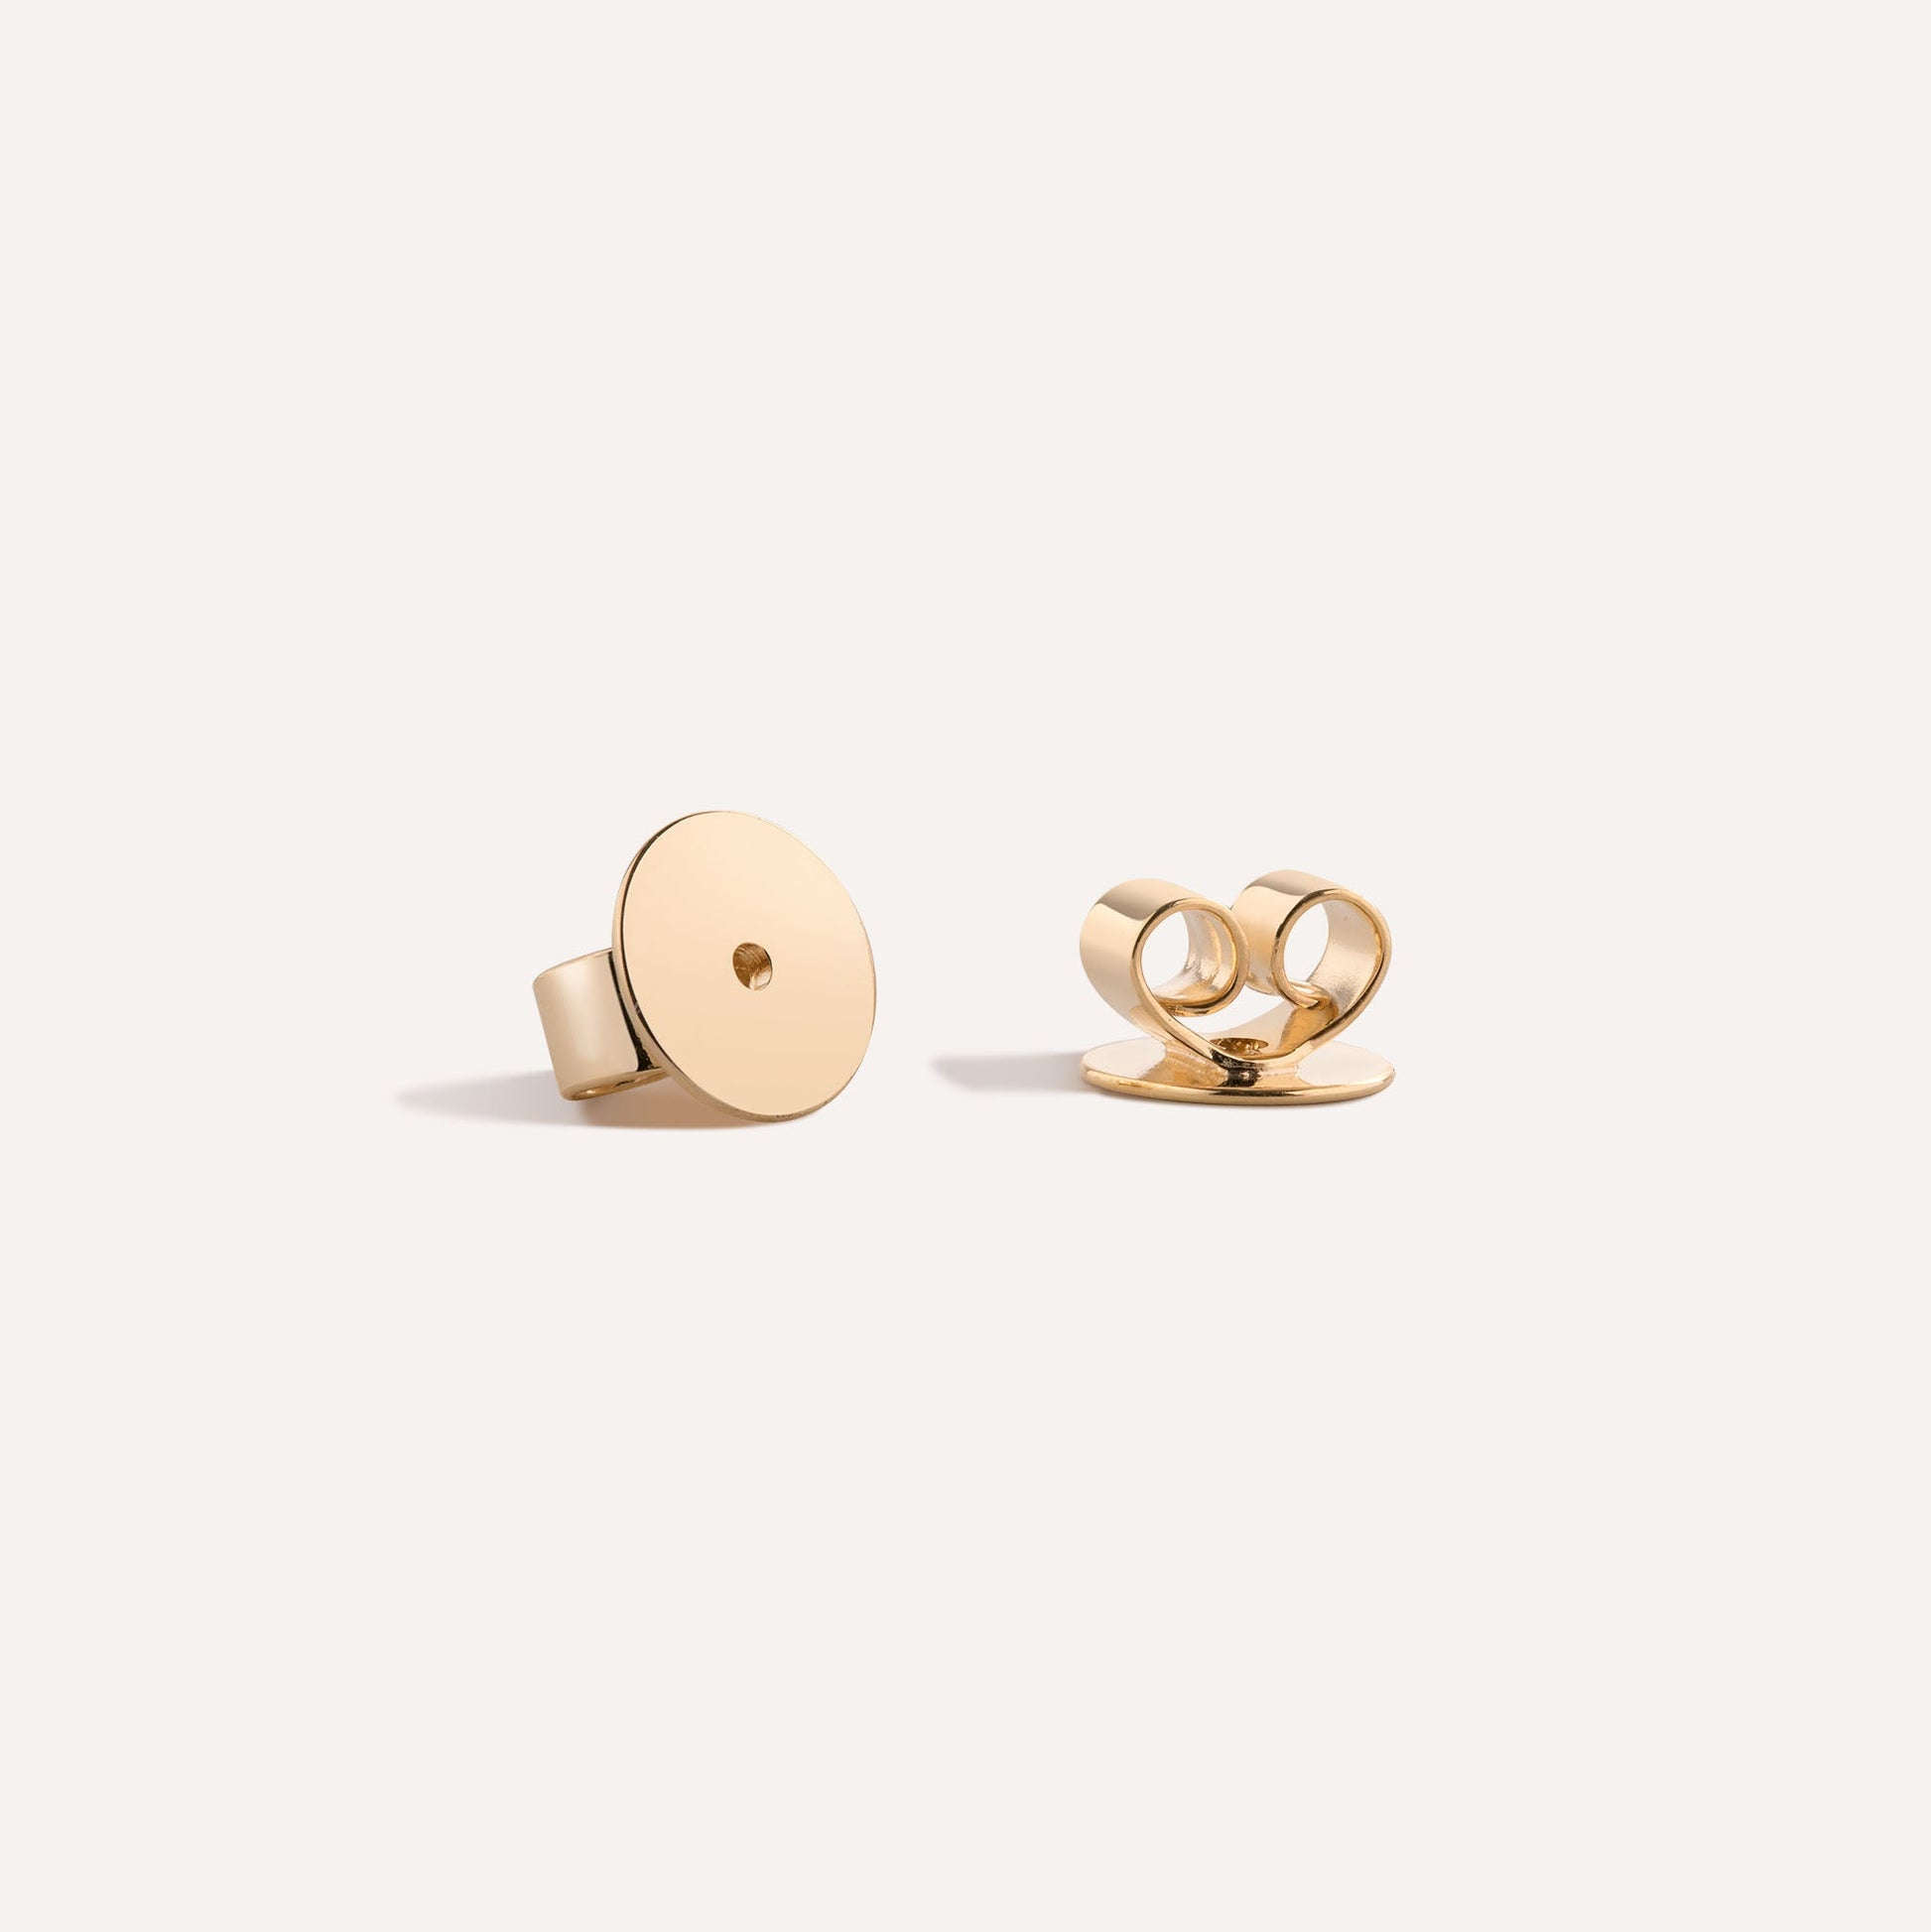 Dilly Dallying Pear Stud Earrings - LÚDERE